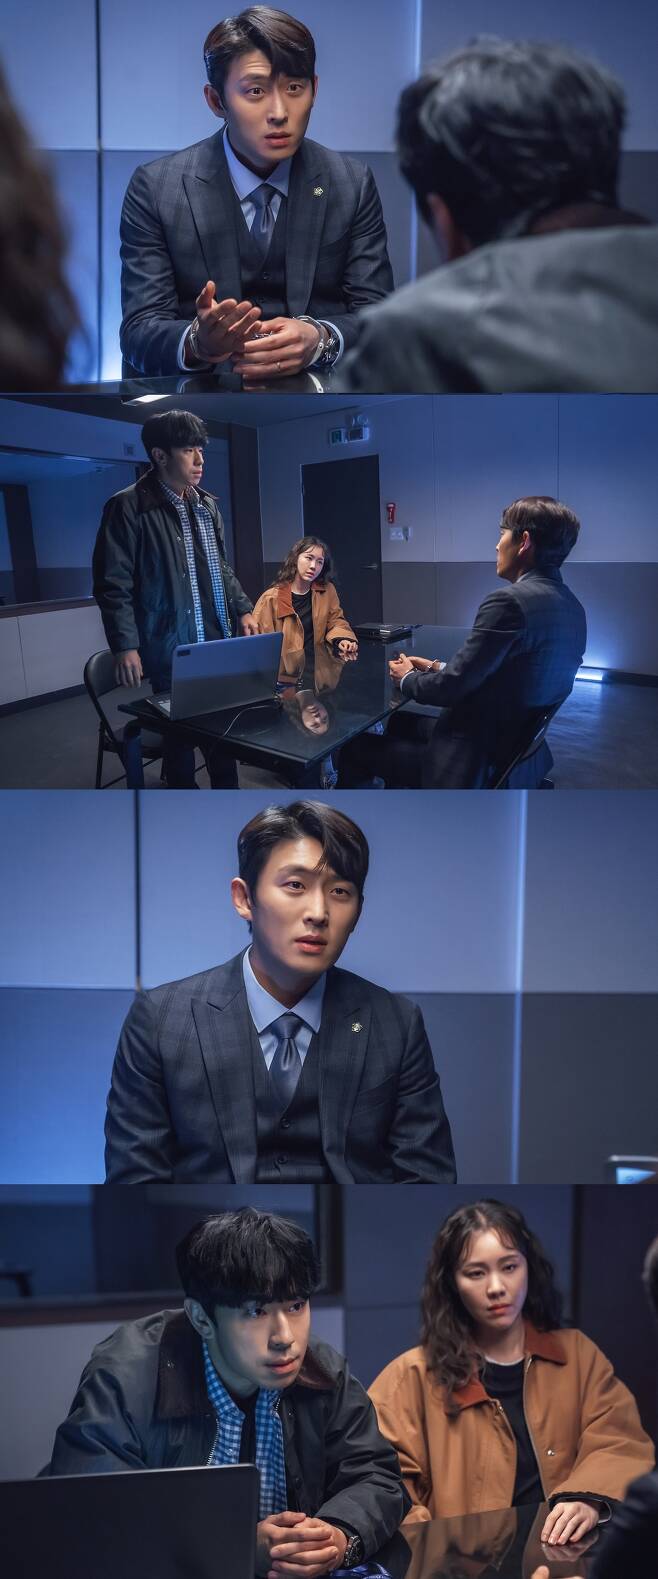 Go Joon, who is wearing wind and die Handcuffs, was spotted being questioned by Detectives as Murder The Suspect.On the 20th, KBS 2TV drama I Die If I Flirtle released a steel by a divorce lawyer, Han Guizhou (Go Joon), who has a handcuffs.In the last 12 episodes, Guizhou met Baek Soo-jung (Hong Soo-hyun) manager Kim Deok-gi (Yoo Jun-hong, manager below) at the request of his wife Kang Yeo-ju (Jo Yeo-jung).Yeoju handed Guizhou a cheap lunch box himself, saying it would help him get the answers he wanted from his manager.However, the manager who ate the lunch box of Yeoju suddenly died, and Guizhou, who was alone with the manager, was arrested as Murder The Suspect.The photo shows Detective Jang Seung-cheol (Isian, hereinafter referred to as Jang Detective) and Guizhou, who is questioned by Ahn Se-jin (Kim Ye-won, hereinafter referred to as An Detective), wearing Handcuffs, drawing attention.There is a tense tension between Detective, who is pushing Guizhou hard, and Guizhou, who claims his innocence in his main job, lawyer mode.Following the death of Baek Soo-jung, the death of the manager, what is the reality of the terrible events involving Yeoju and Guizhou, and who is the real killer who killed them?A tense psychological battle will be held between a Guizhou who became Murder The Suspect at a moment and Detectives who are trying to reveal the truth, said the production team. I hope you will watch to the end who killed Baek Soo-jung manager Kim Duk-ki.Meanwhile, The Winding Kills will air at 9:30 p.m. on the 20th.iMBC  Photos Provide KBS